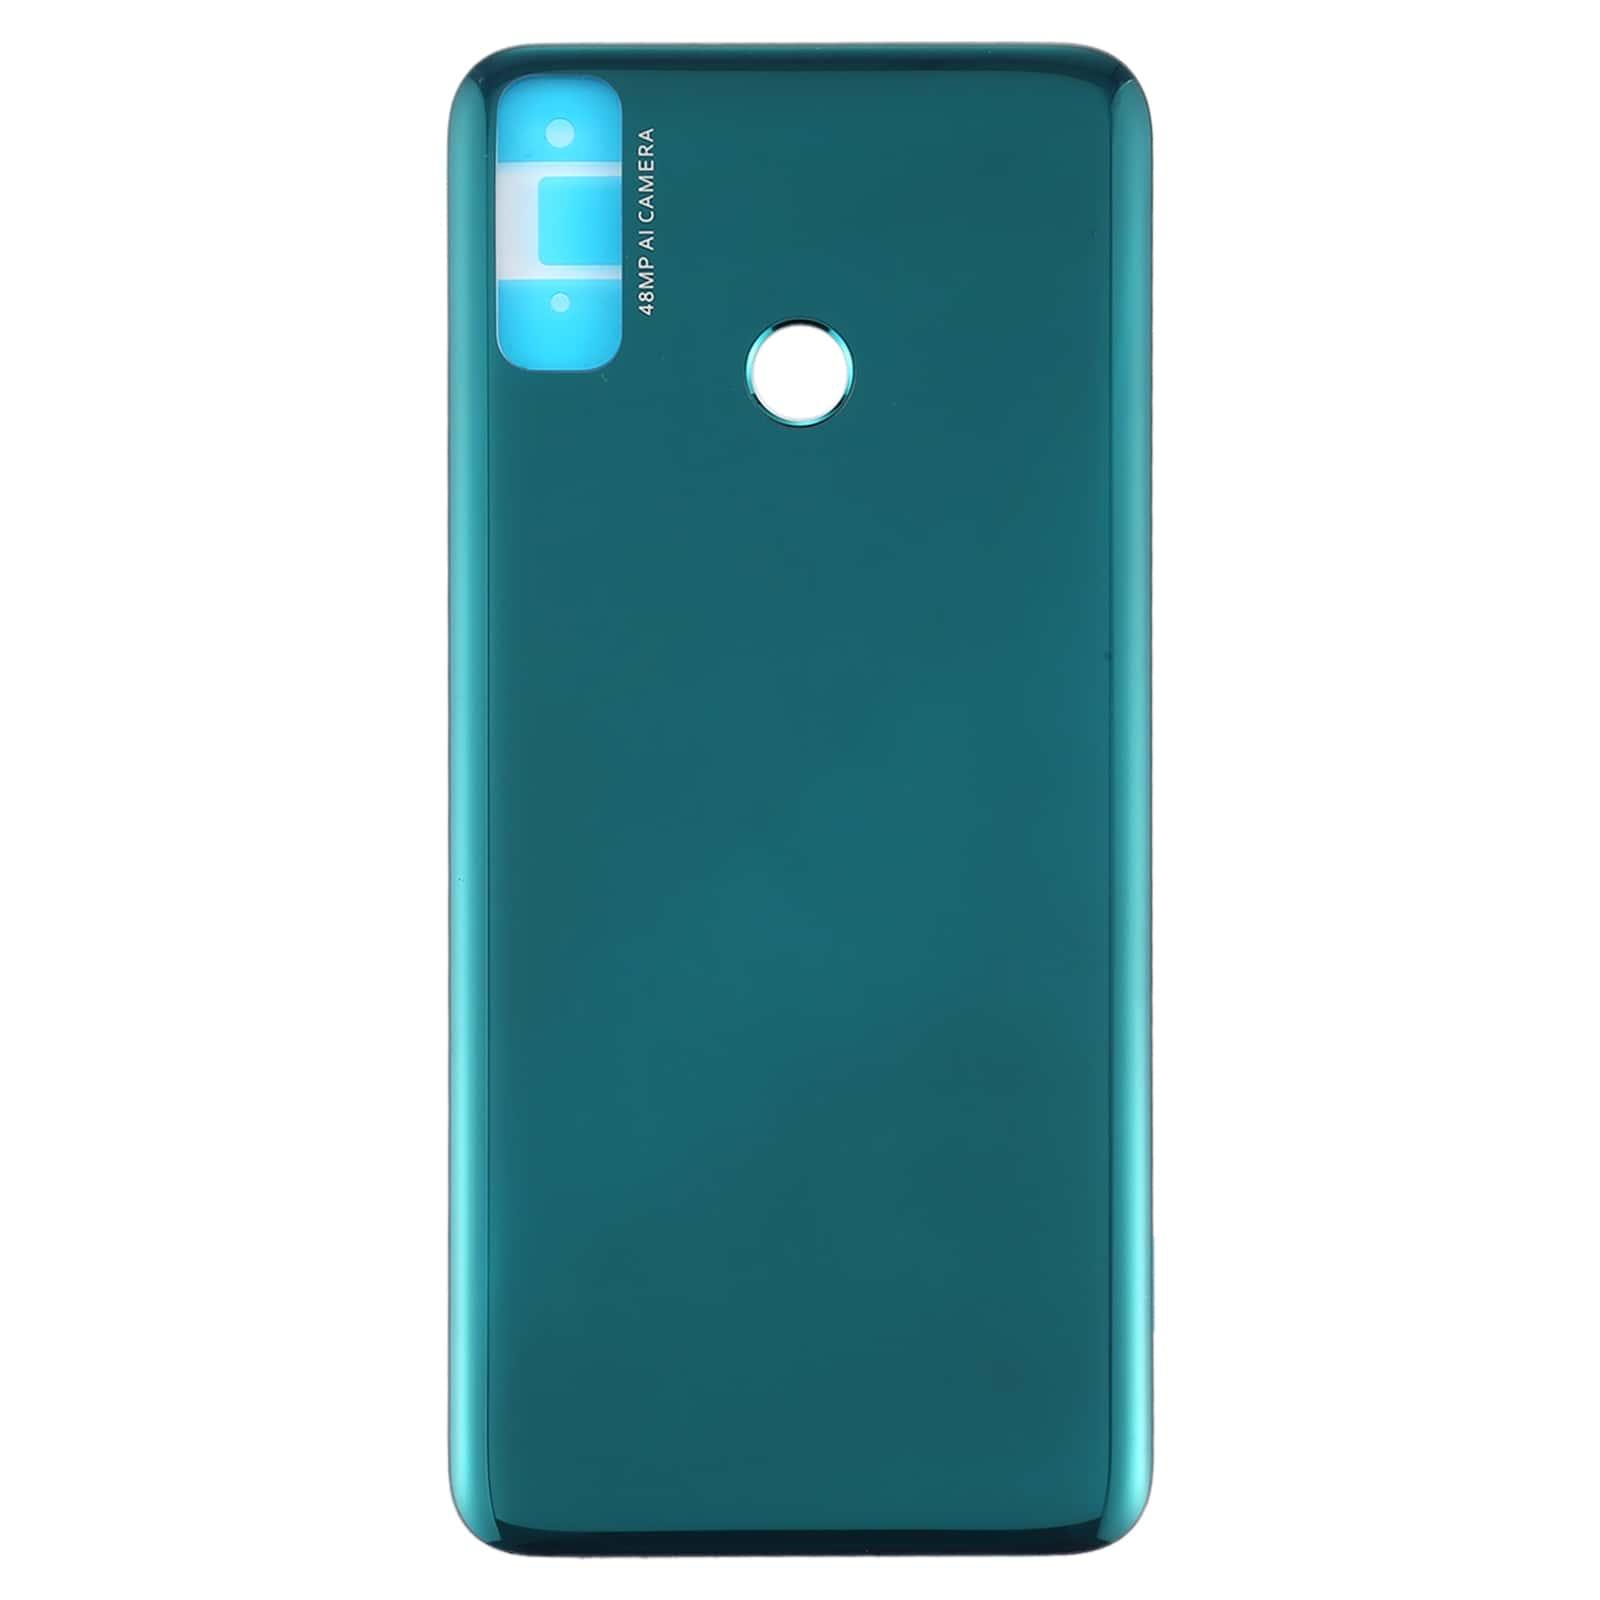 Back Panel Housing Body for Huawei Y8s Green